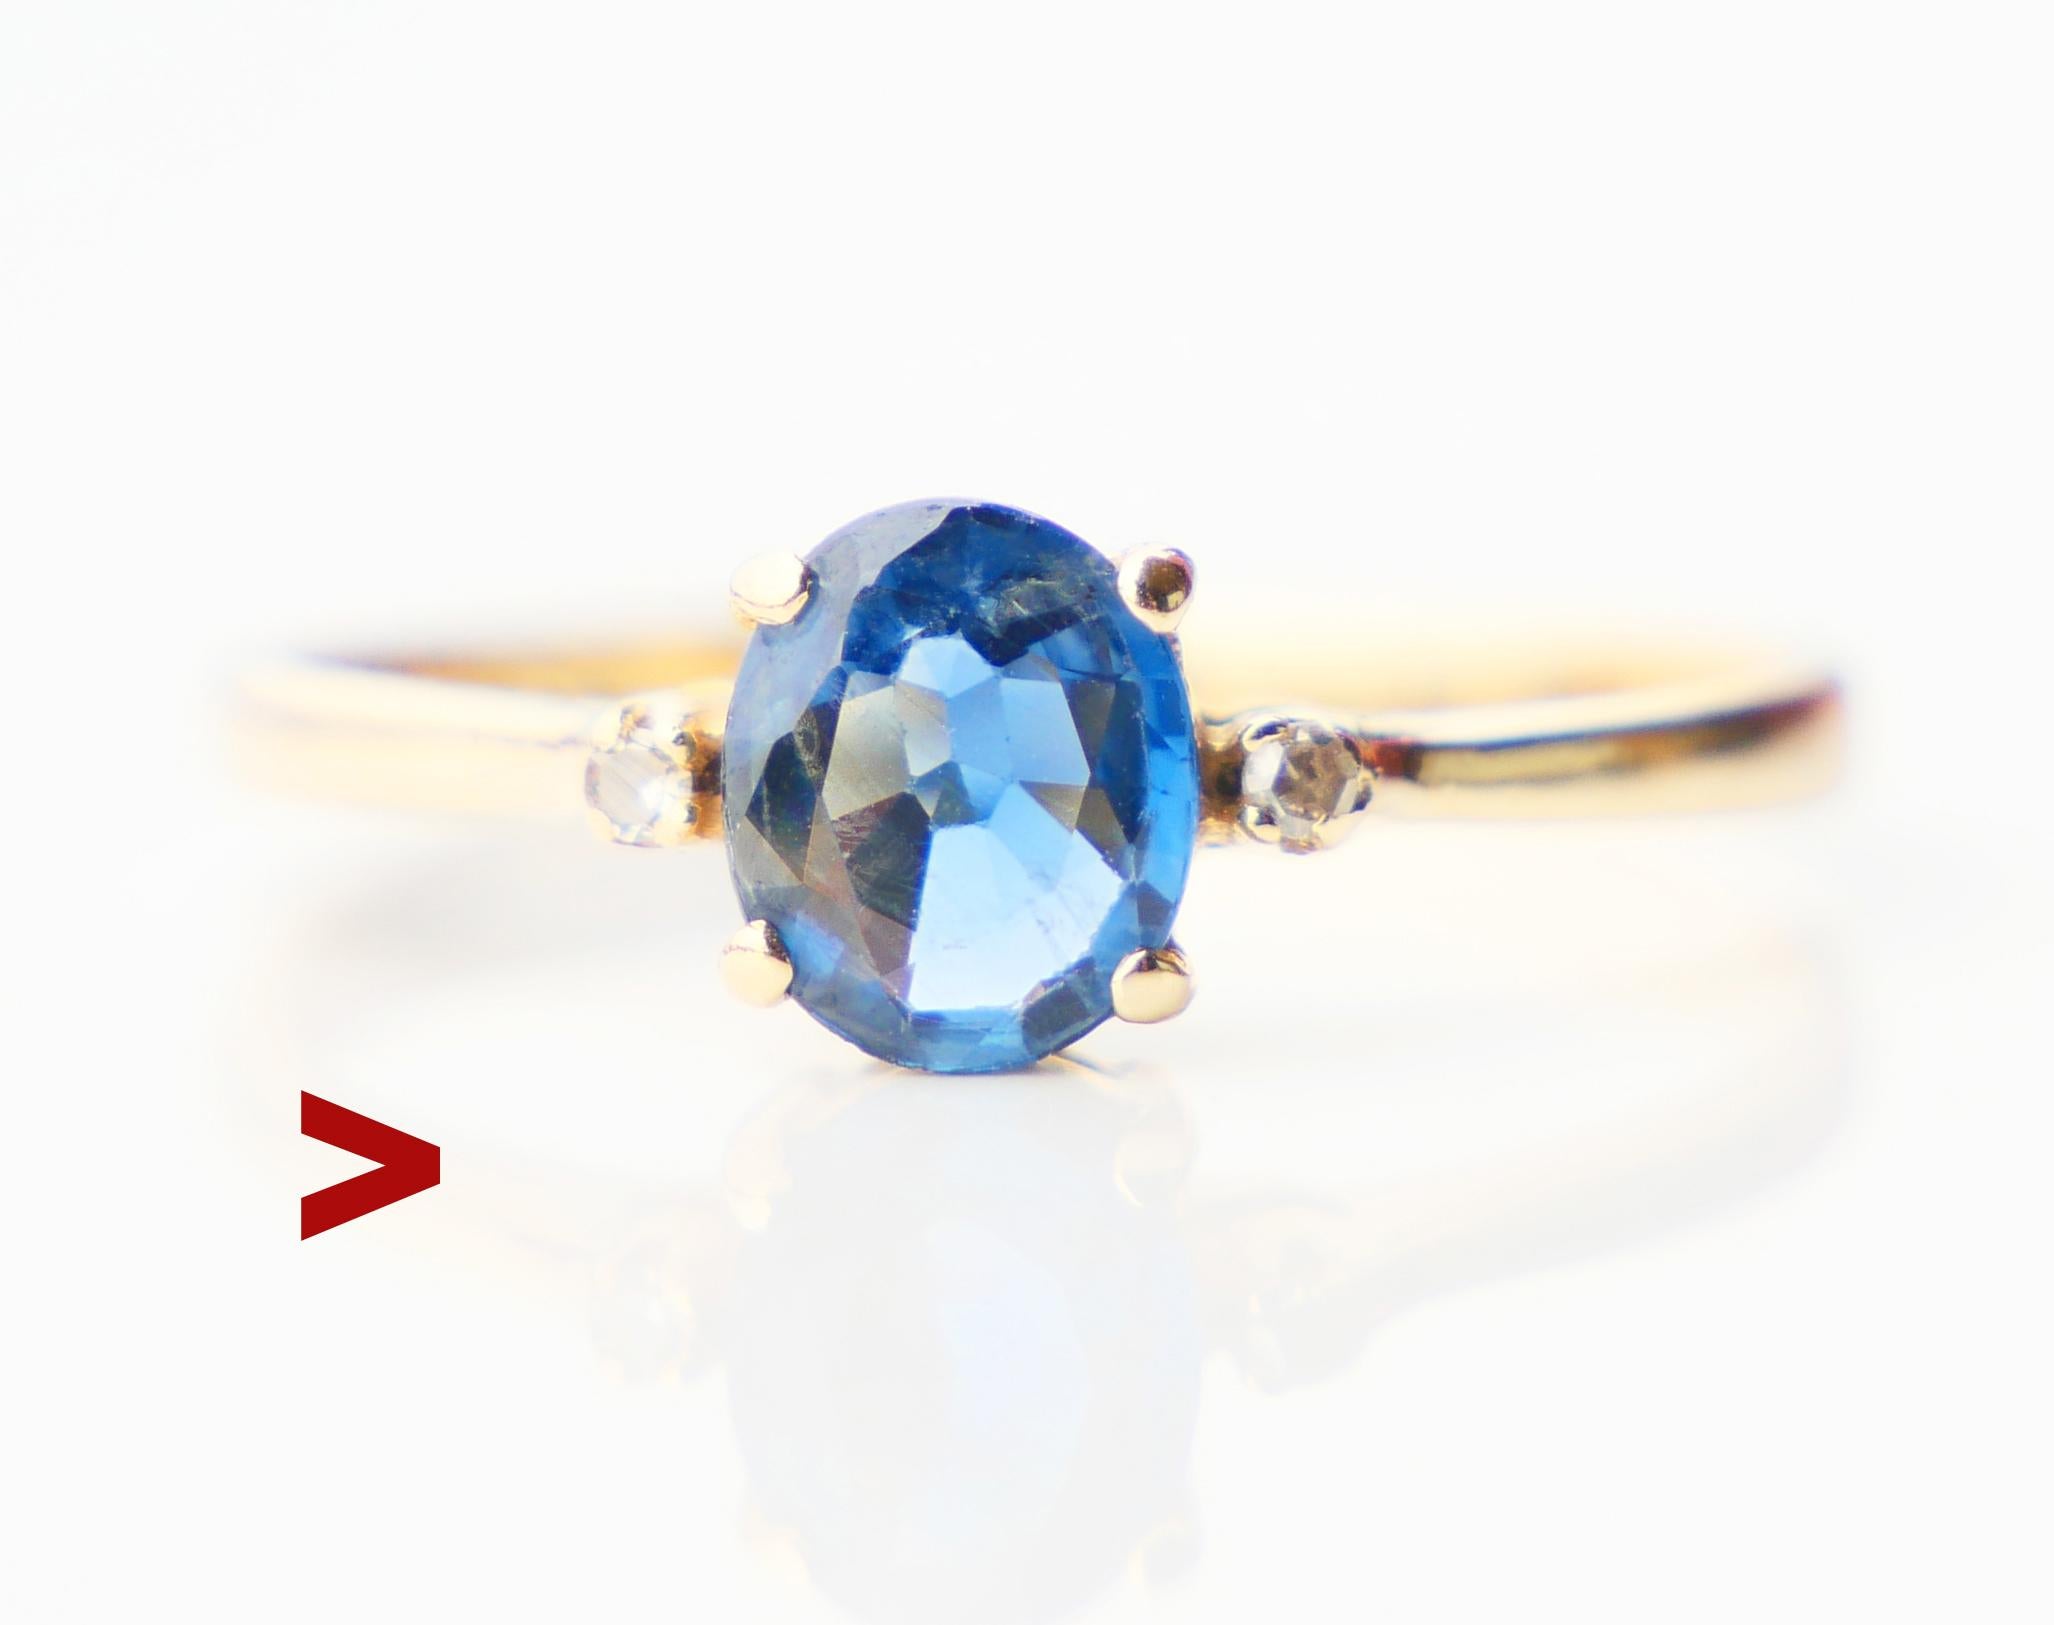 Vintage Danish Sapphire and Diamonds Ring. The band is solid 14ct Yellow Gold with claw set natural medium Blue / transparent Sapphire oval cut 6mm x 5 mm x 2.35 mm deep / 0.75 ct + 2 Diamonds Ø 1.5 mm /0.015 ct each. Hallmarked with the initials of